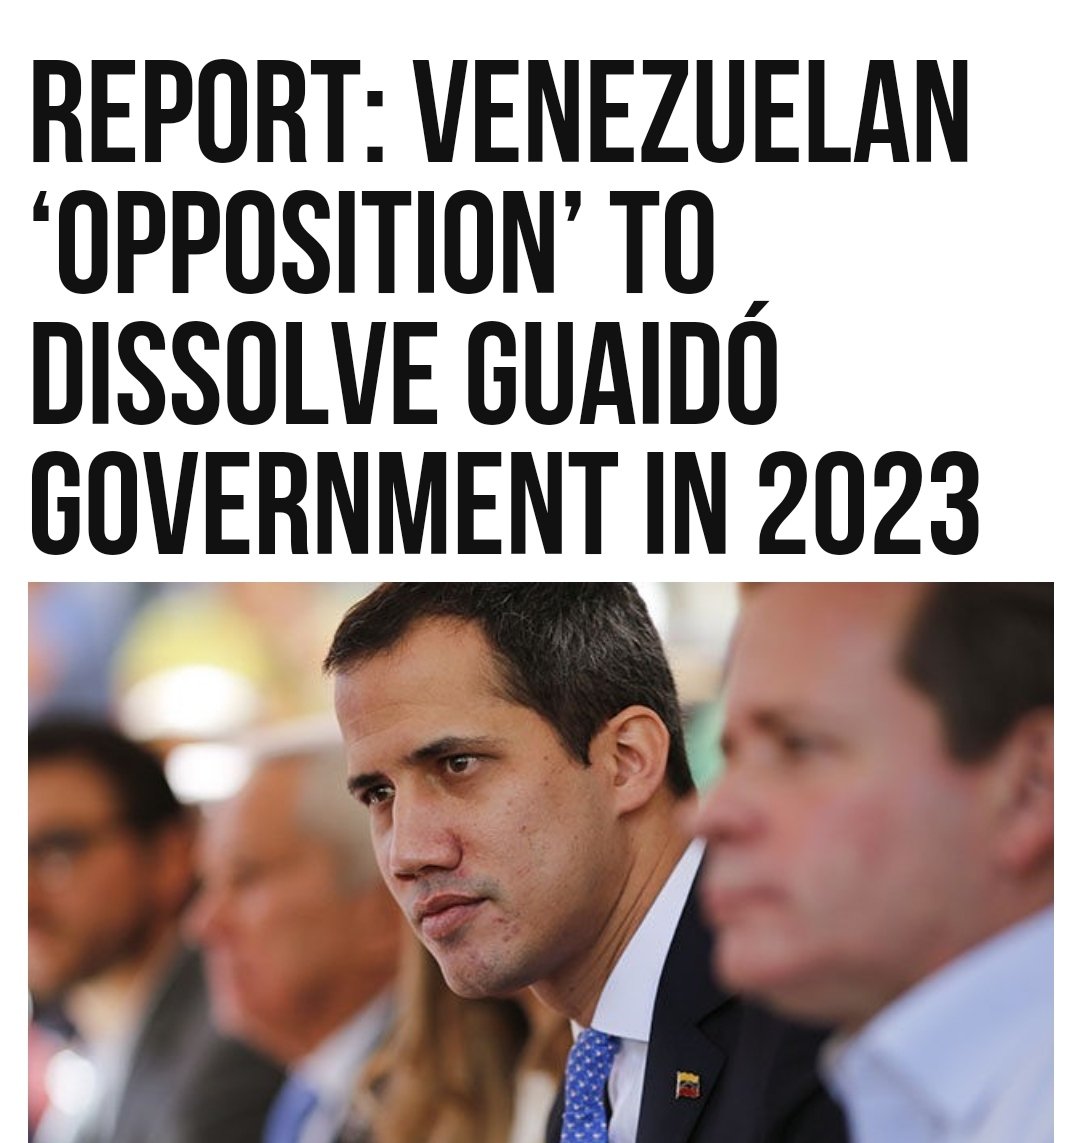 #Venezuelan opposition parties are no longer willing to back the #Trump era fiction that unelected puppet Juan #Guaido is 'president' of #Venezuela. However that fiction allowed the #AngloAmericans to steal billions of Venezuela's foreign assets and inflate energy prices.